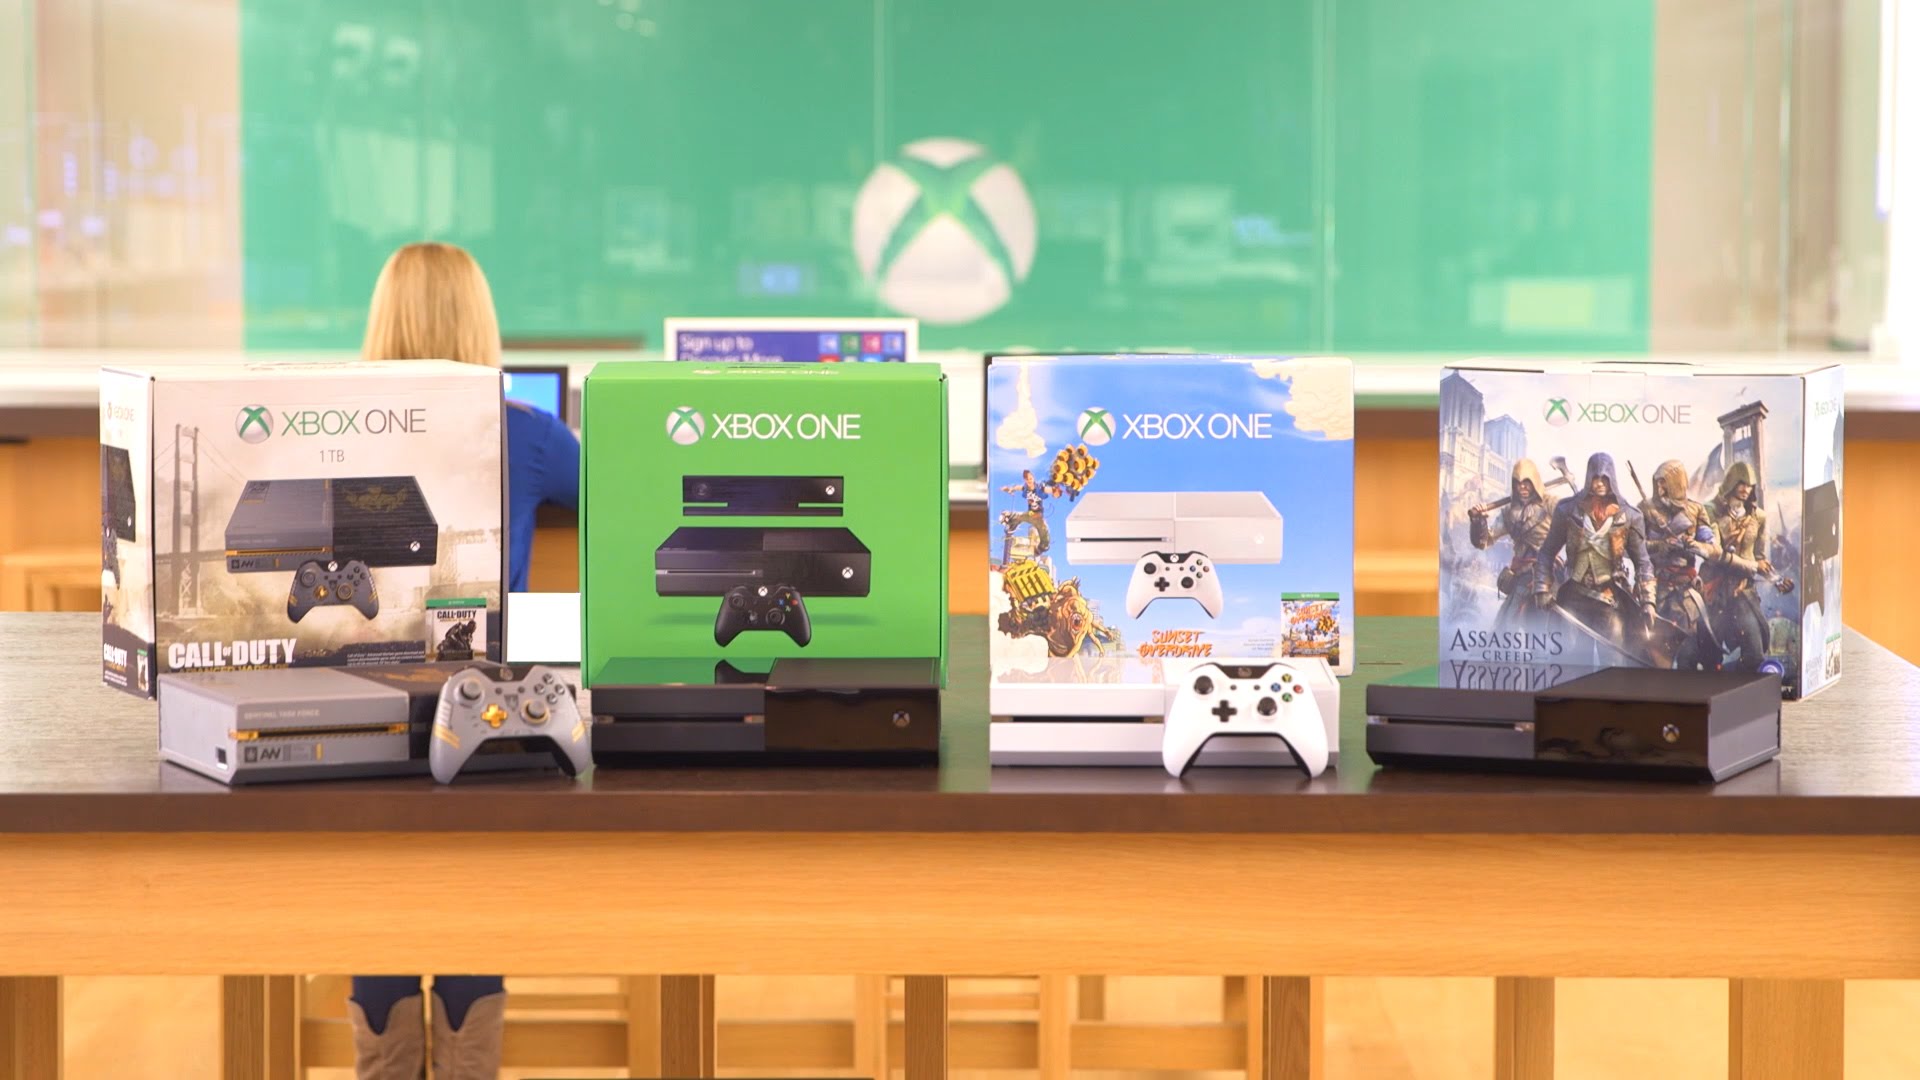 Video For Xbox One Available for $349 Starting November 2; Up to $150 in Savings